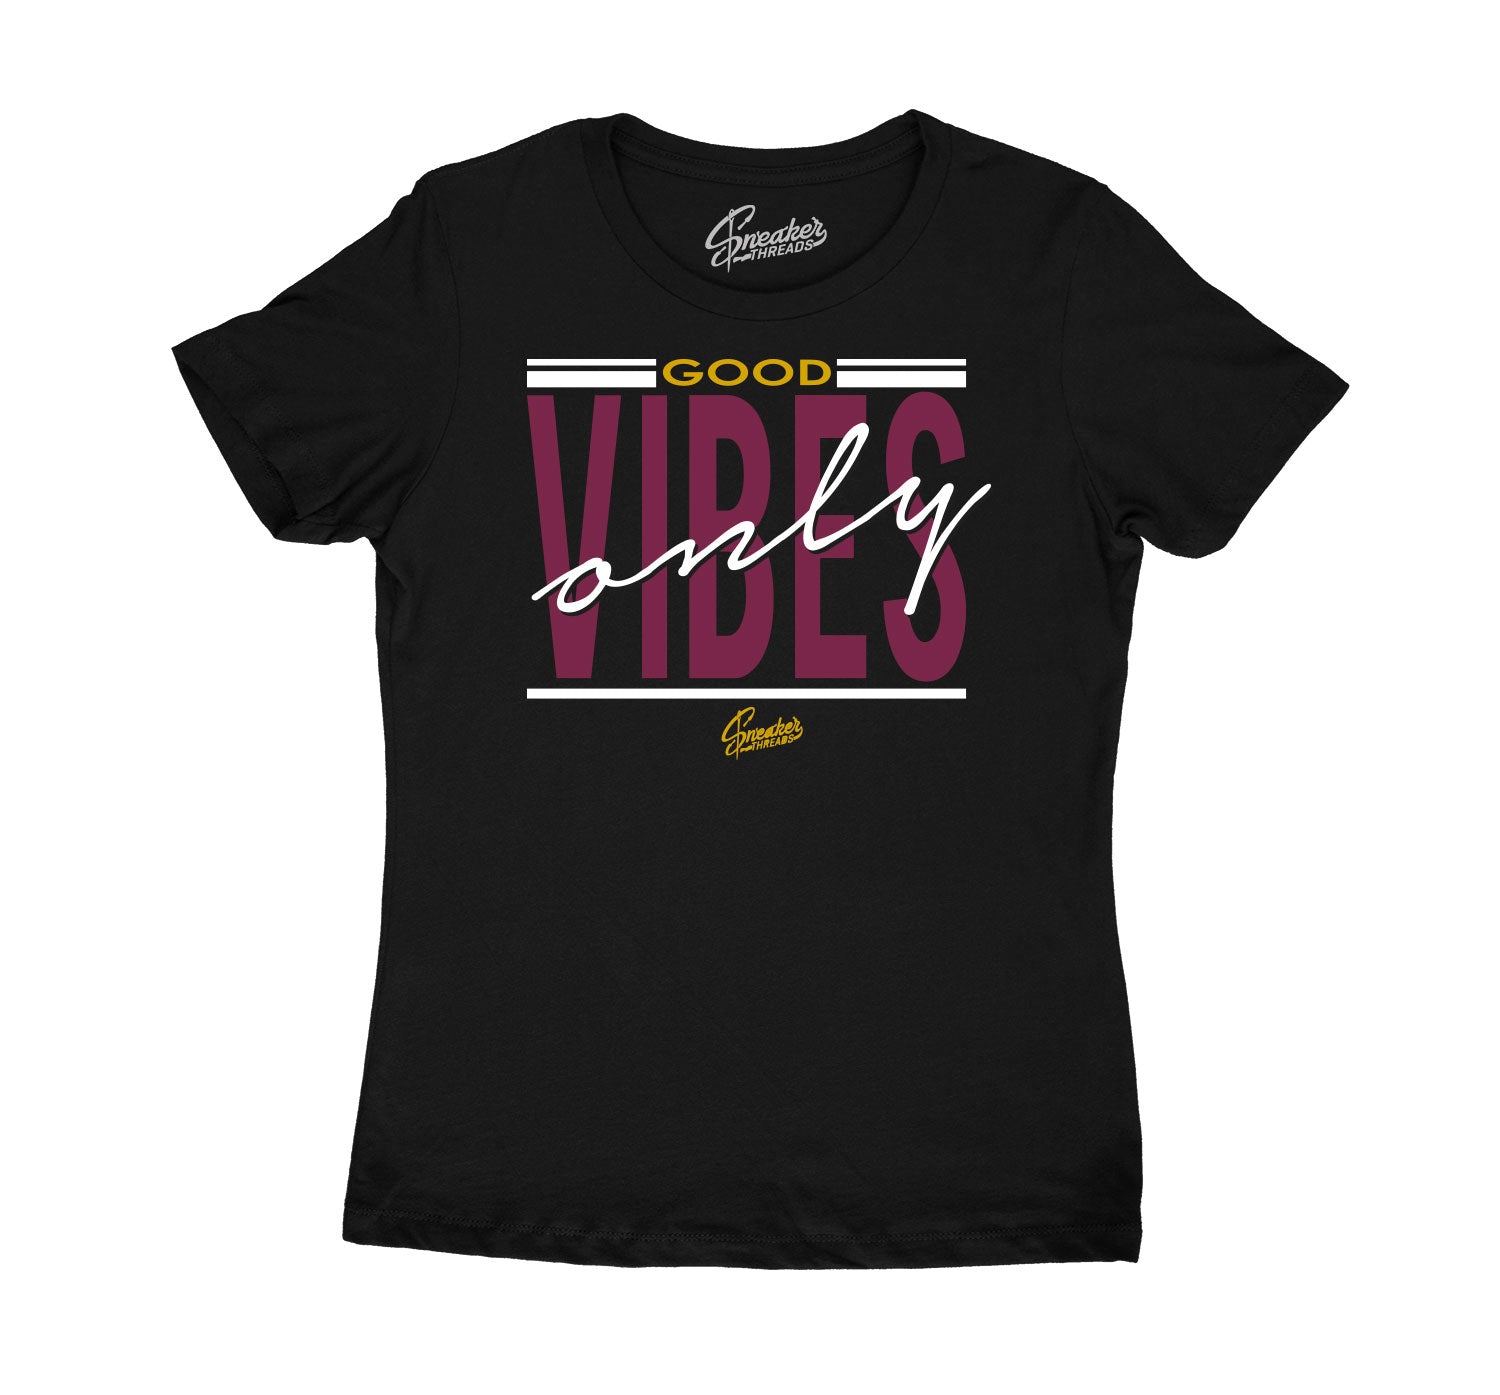 Womens Singles Day 6 Shirt - Good Vibes Only - Black